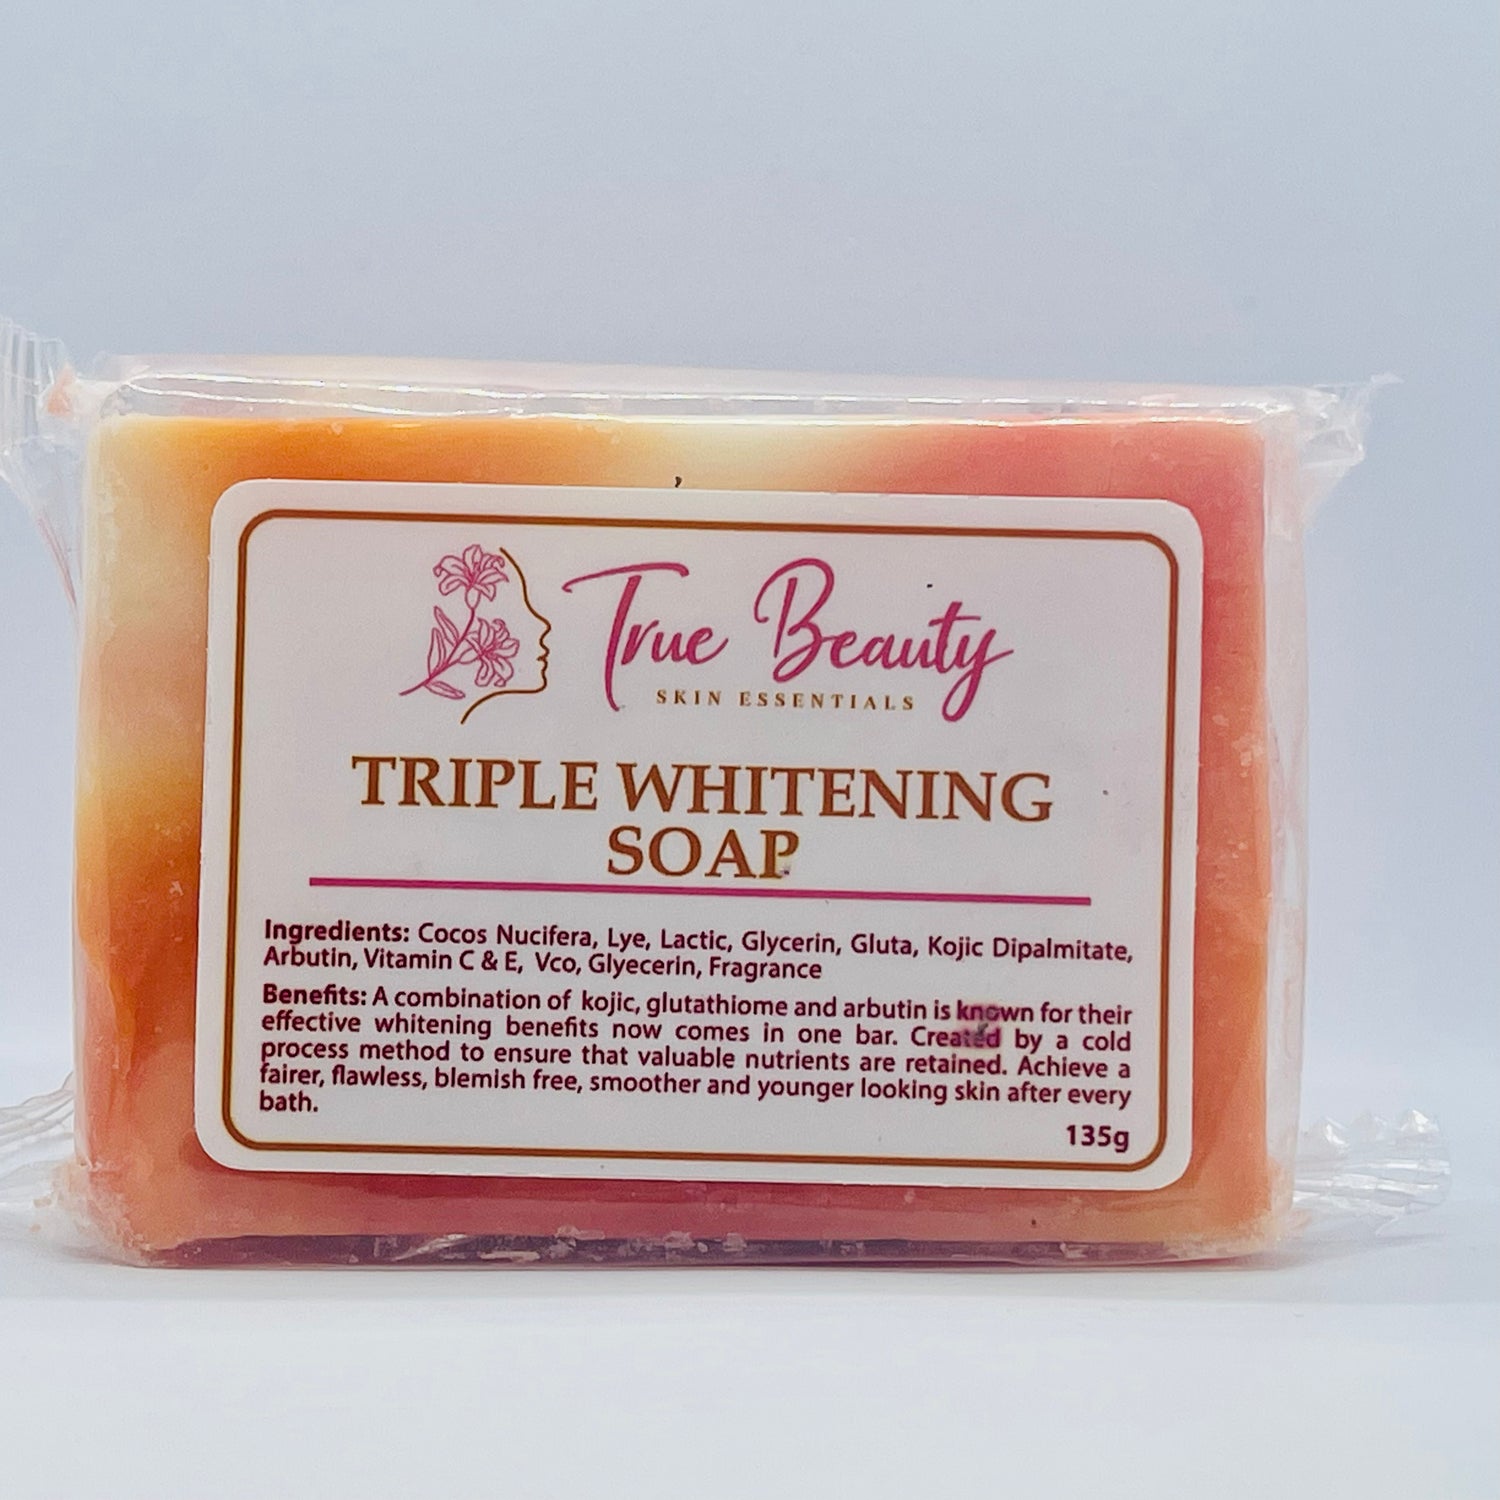 True Beauty Skin Essentials Soap Collections - True Beauty Skin Essentials